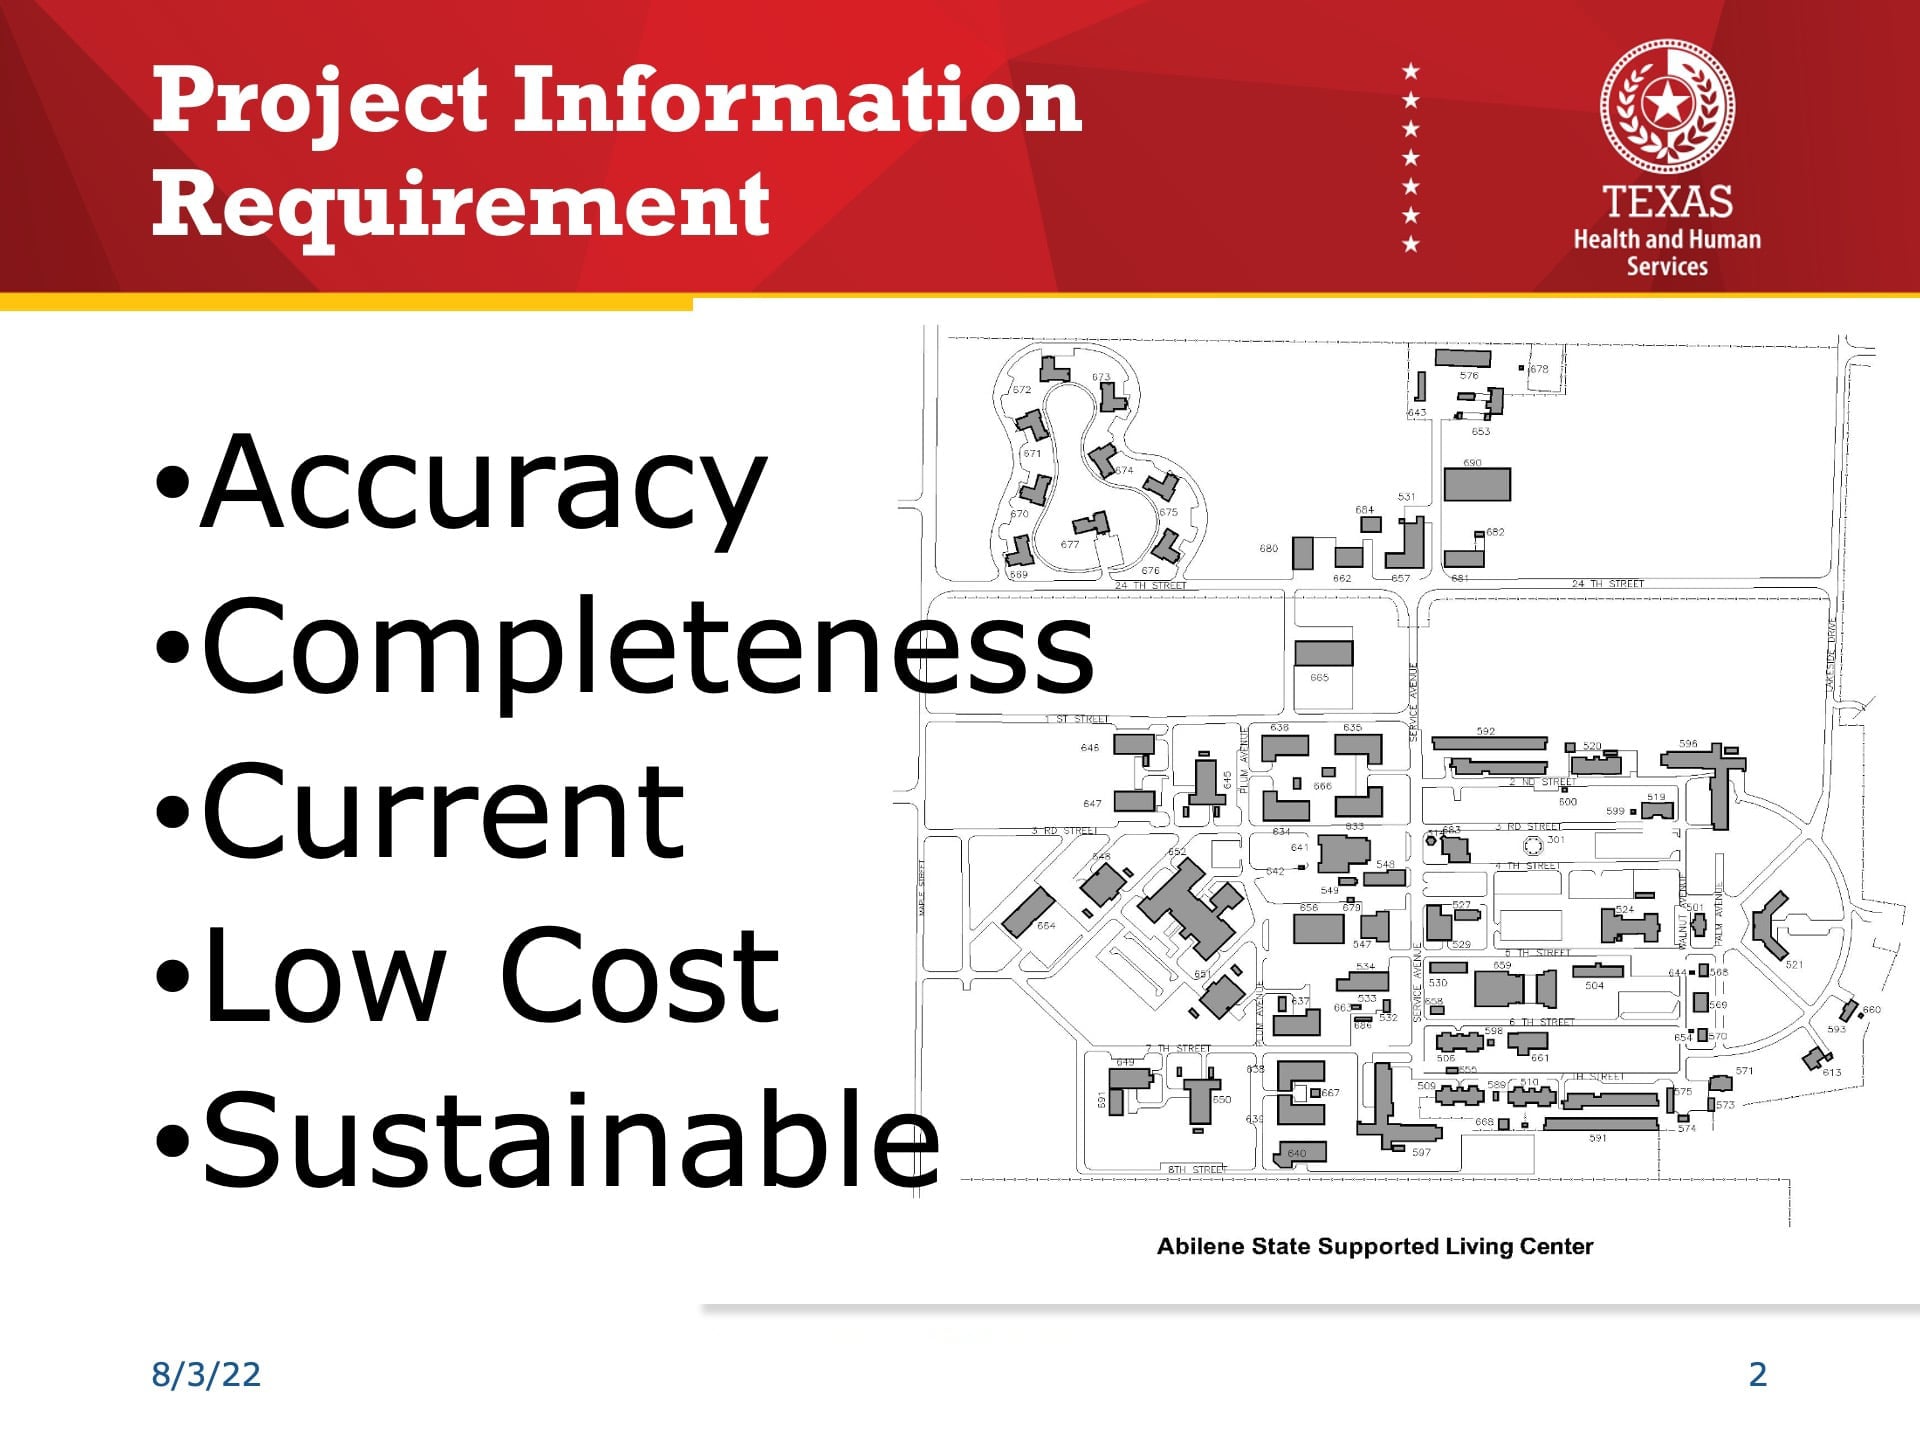 Esri UC 2022 Slide Reading: "Project Information Requirements: Accuracy, Completeness, Current, Low Cost, Sustainable." A photo of a campus map is displayed to the right.